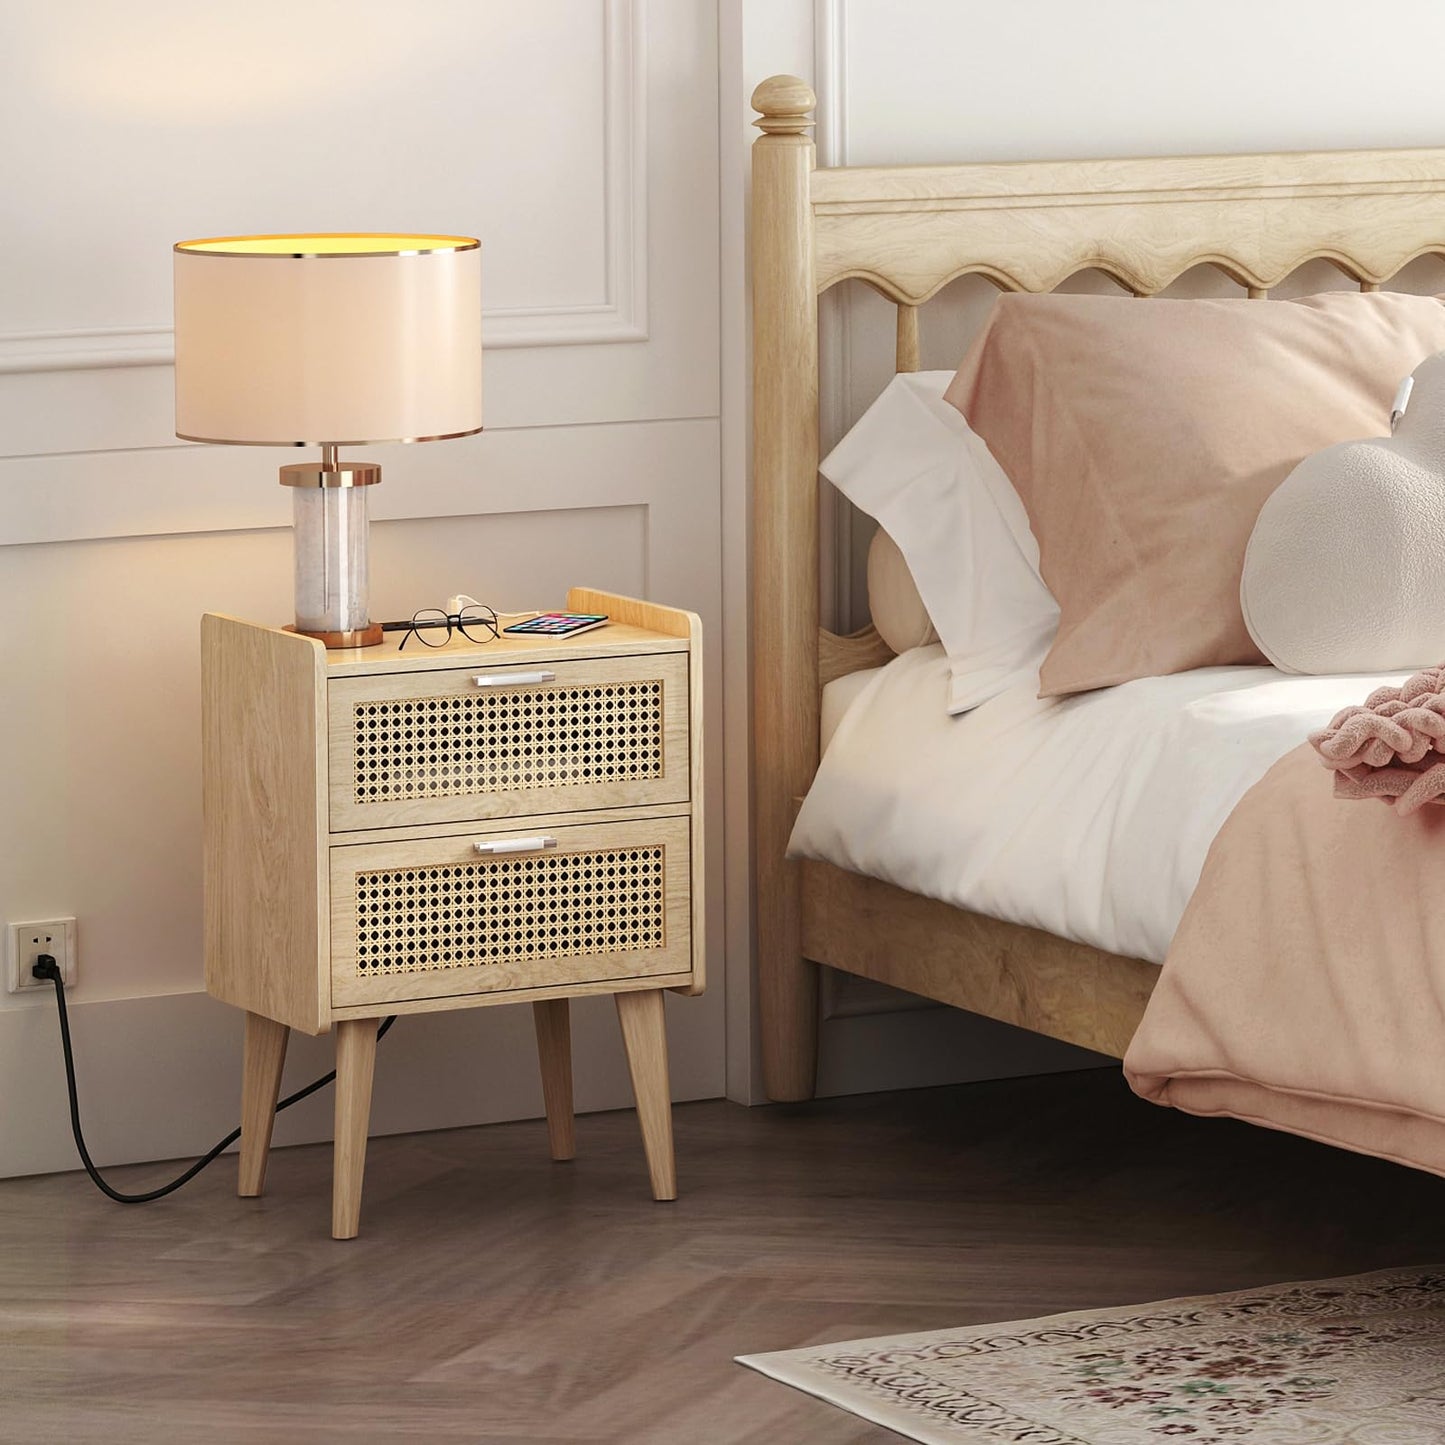 HHETOGOL Rattan Nightstand with Charging Station & 2 Rattan-Like Decor Drawers,Small End Table with Solid Wood Feet for Small Bedroom, Living Room, TTBZ02YE